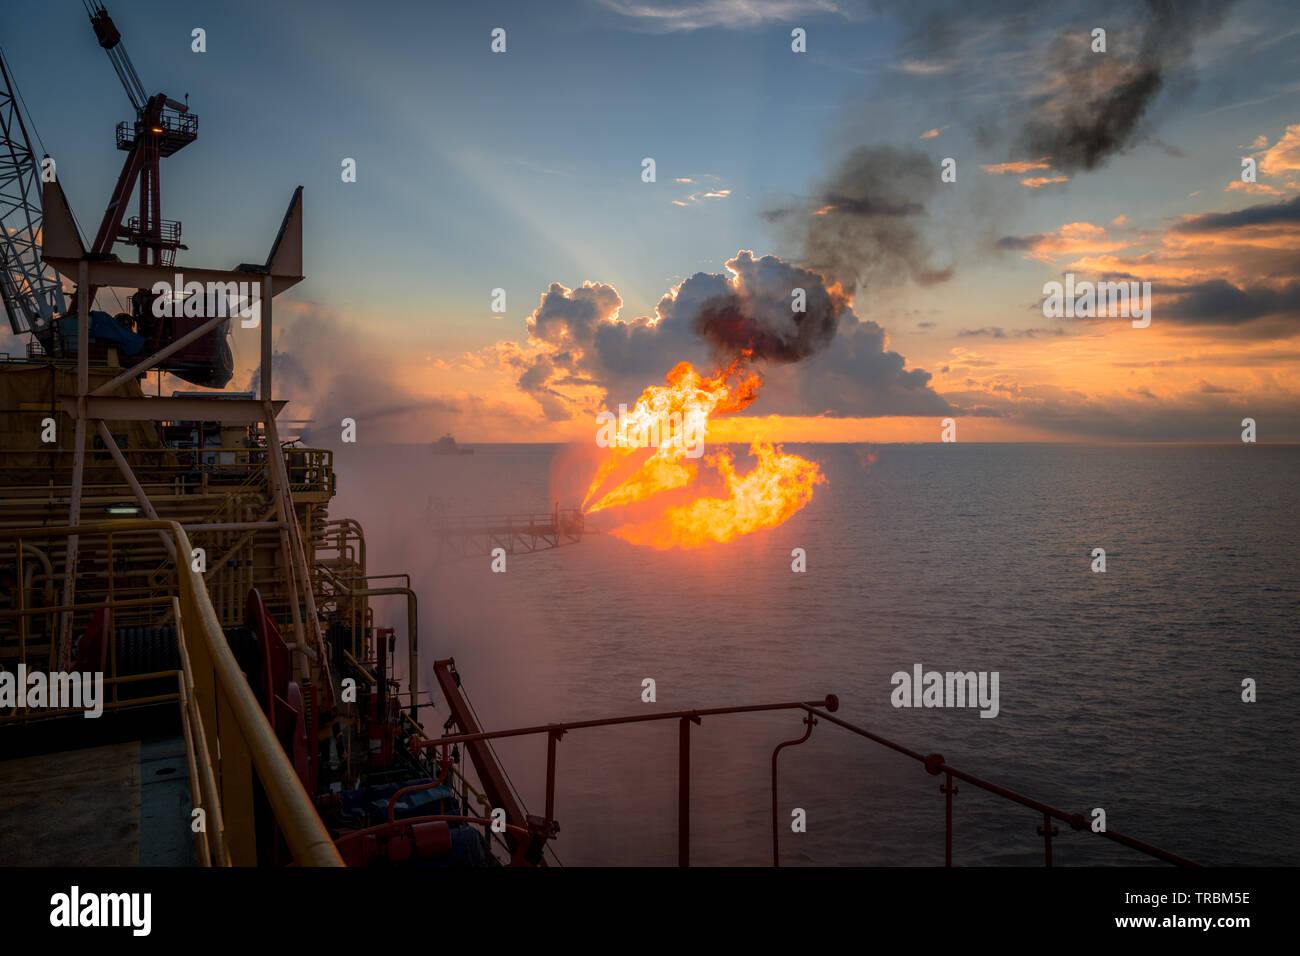 Well testing operation (flaring) of an oil and gas drilling rig. Burning huge gas flame controlled by the deluge system Stock Photo